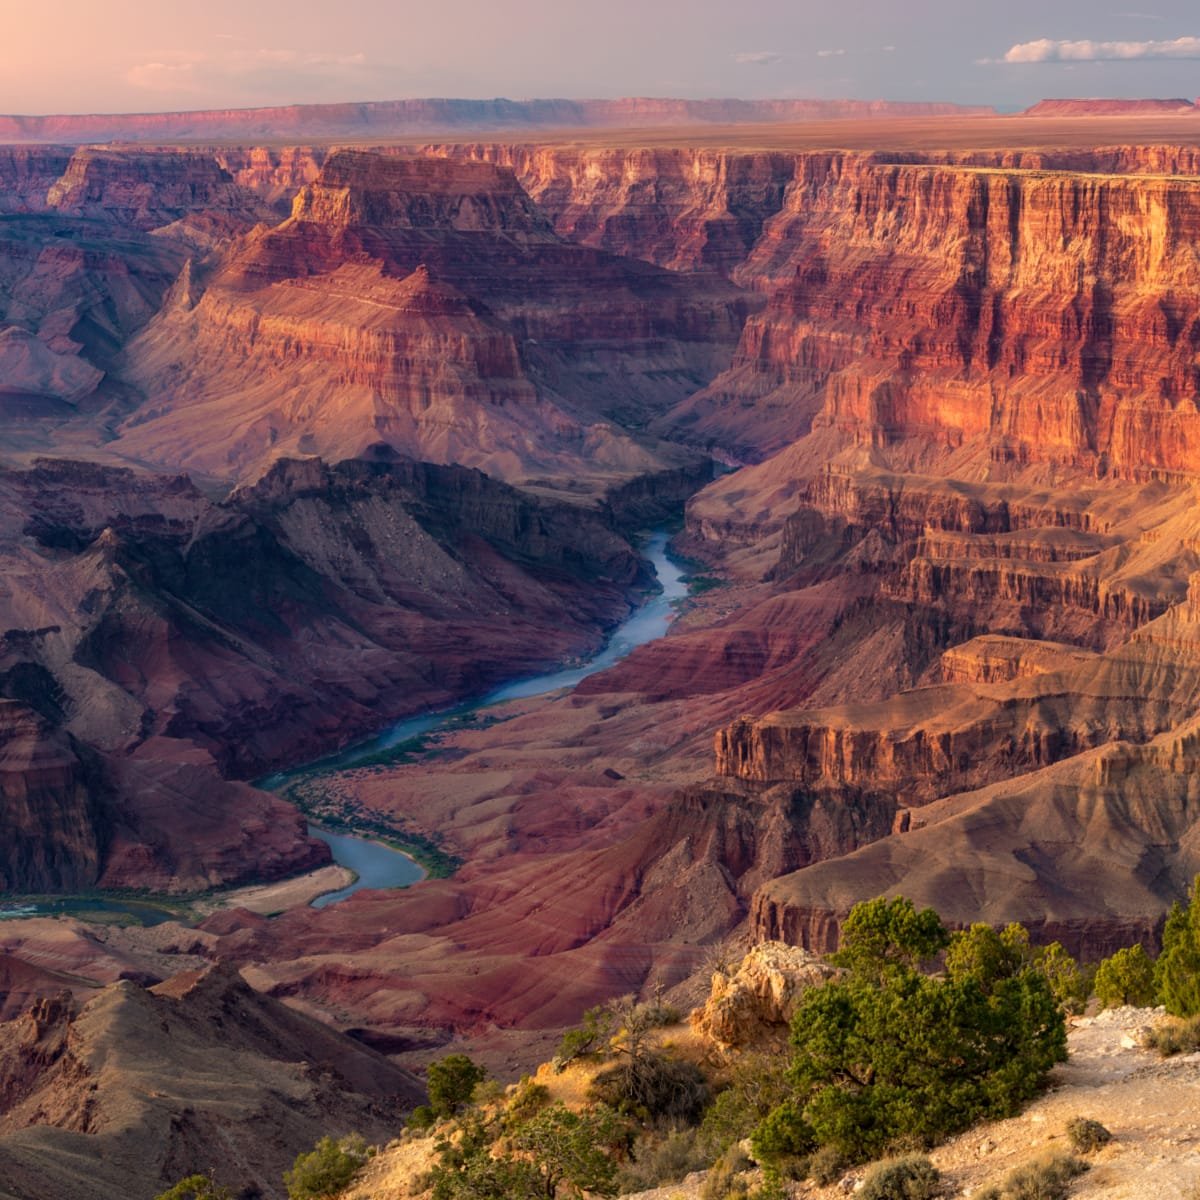 The Grand Canyon and the Colorado River